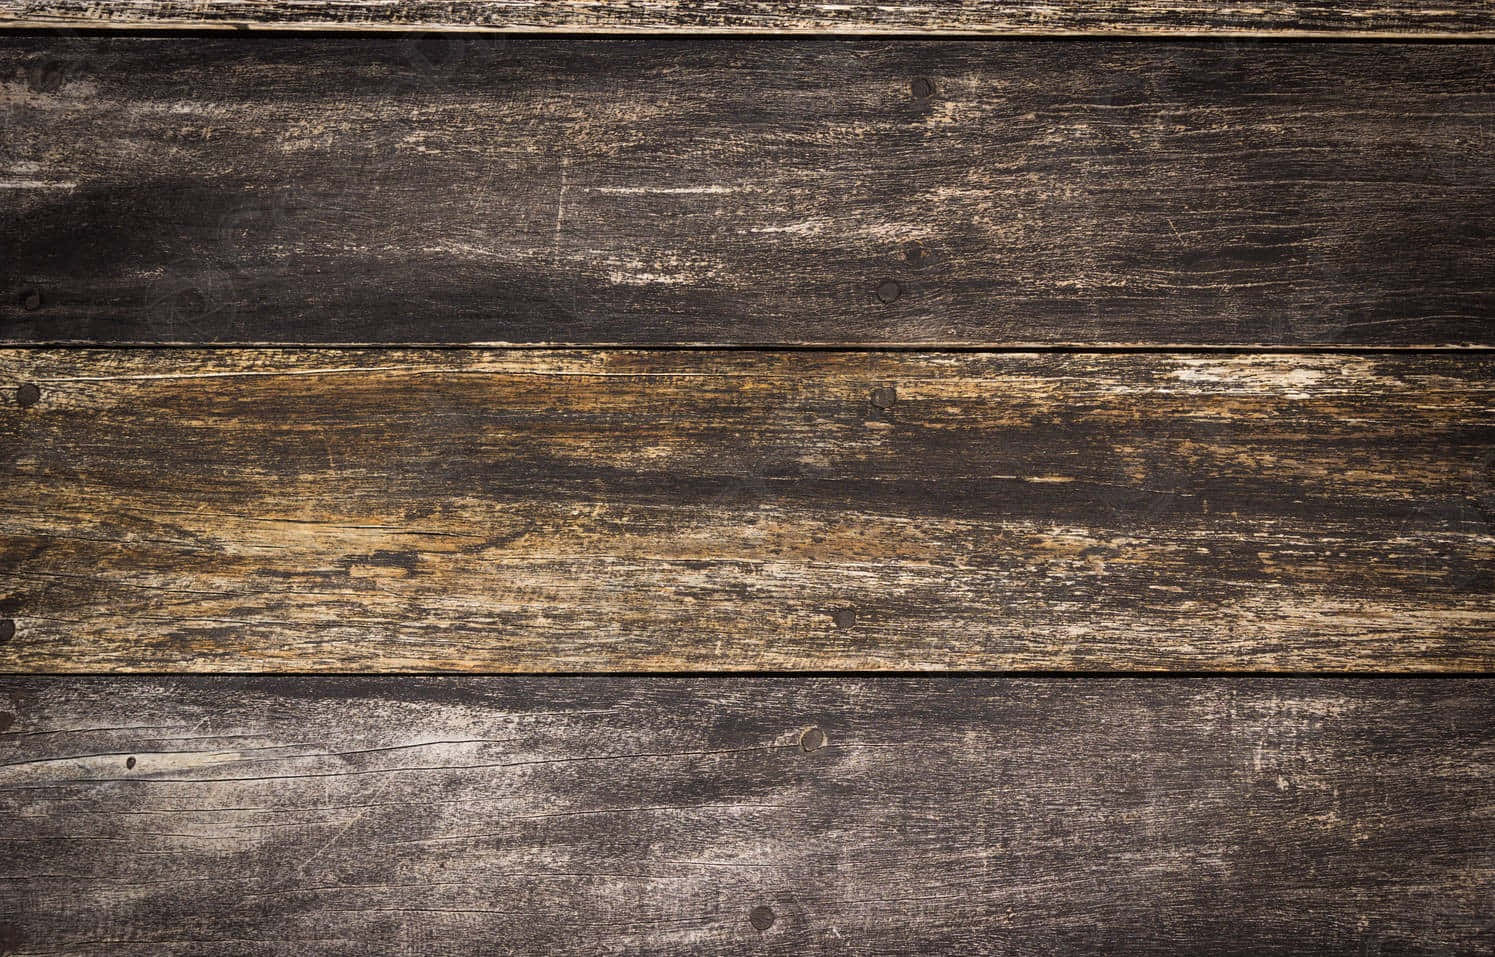 A Wooden Background With A Rusty Color Wallpaper